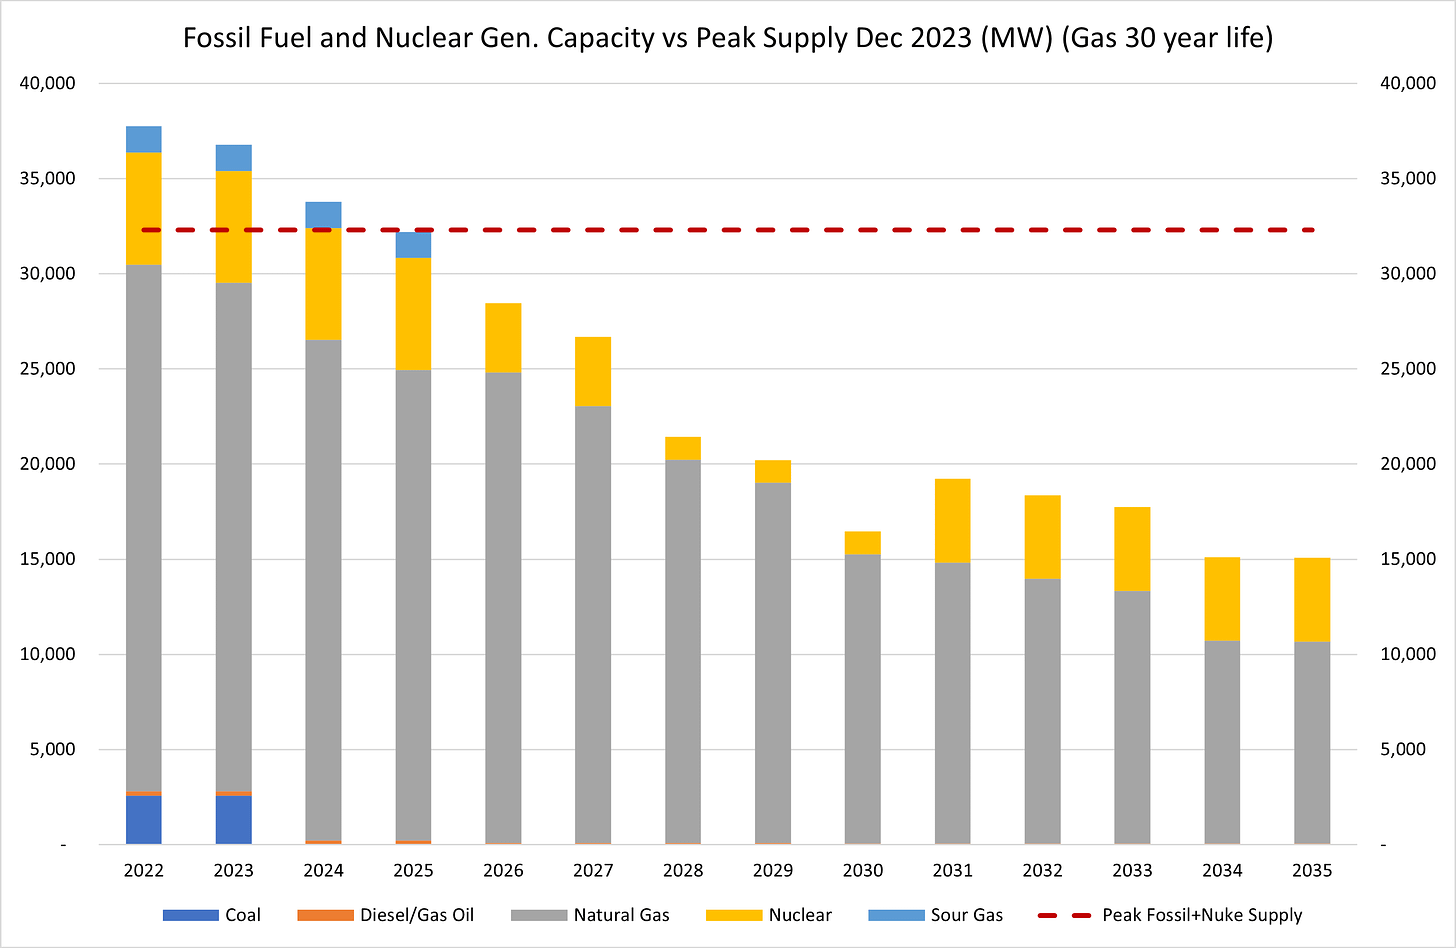 Figure 2 - Fossil Fuel and Nuclear Gen Capacity vs Peak Supply Dec 2023 (MW) (Gas Lifetime 30 years)